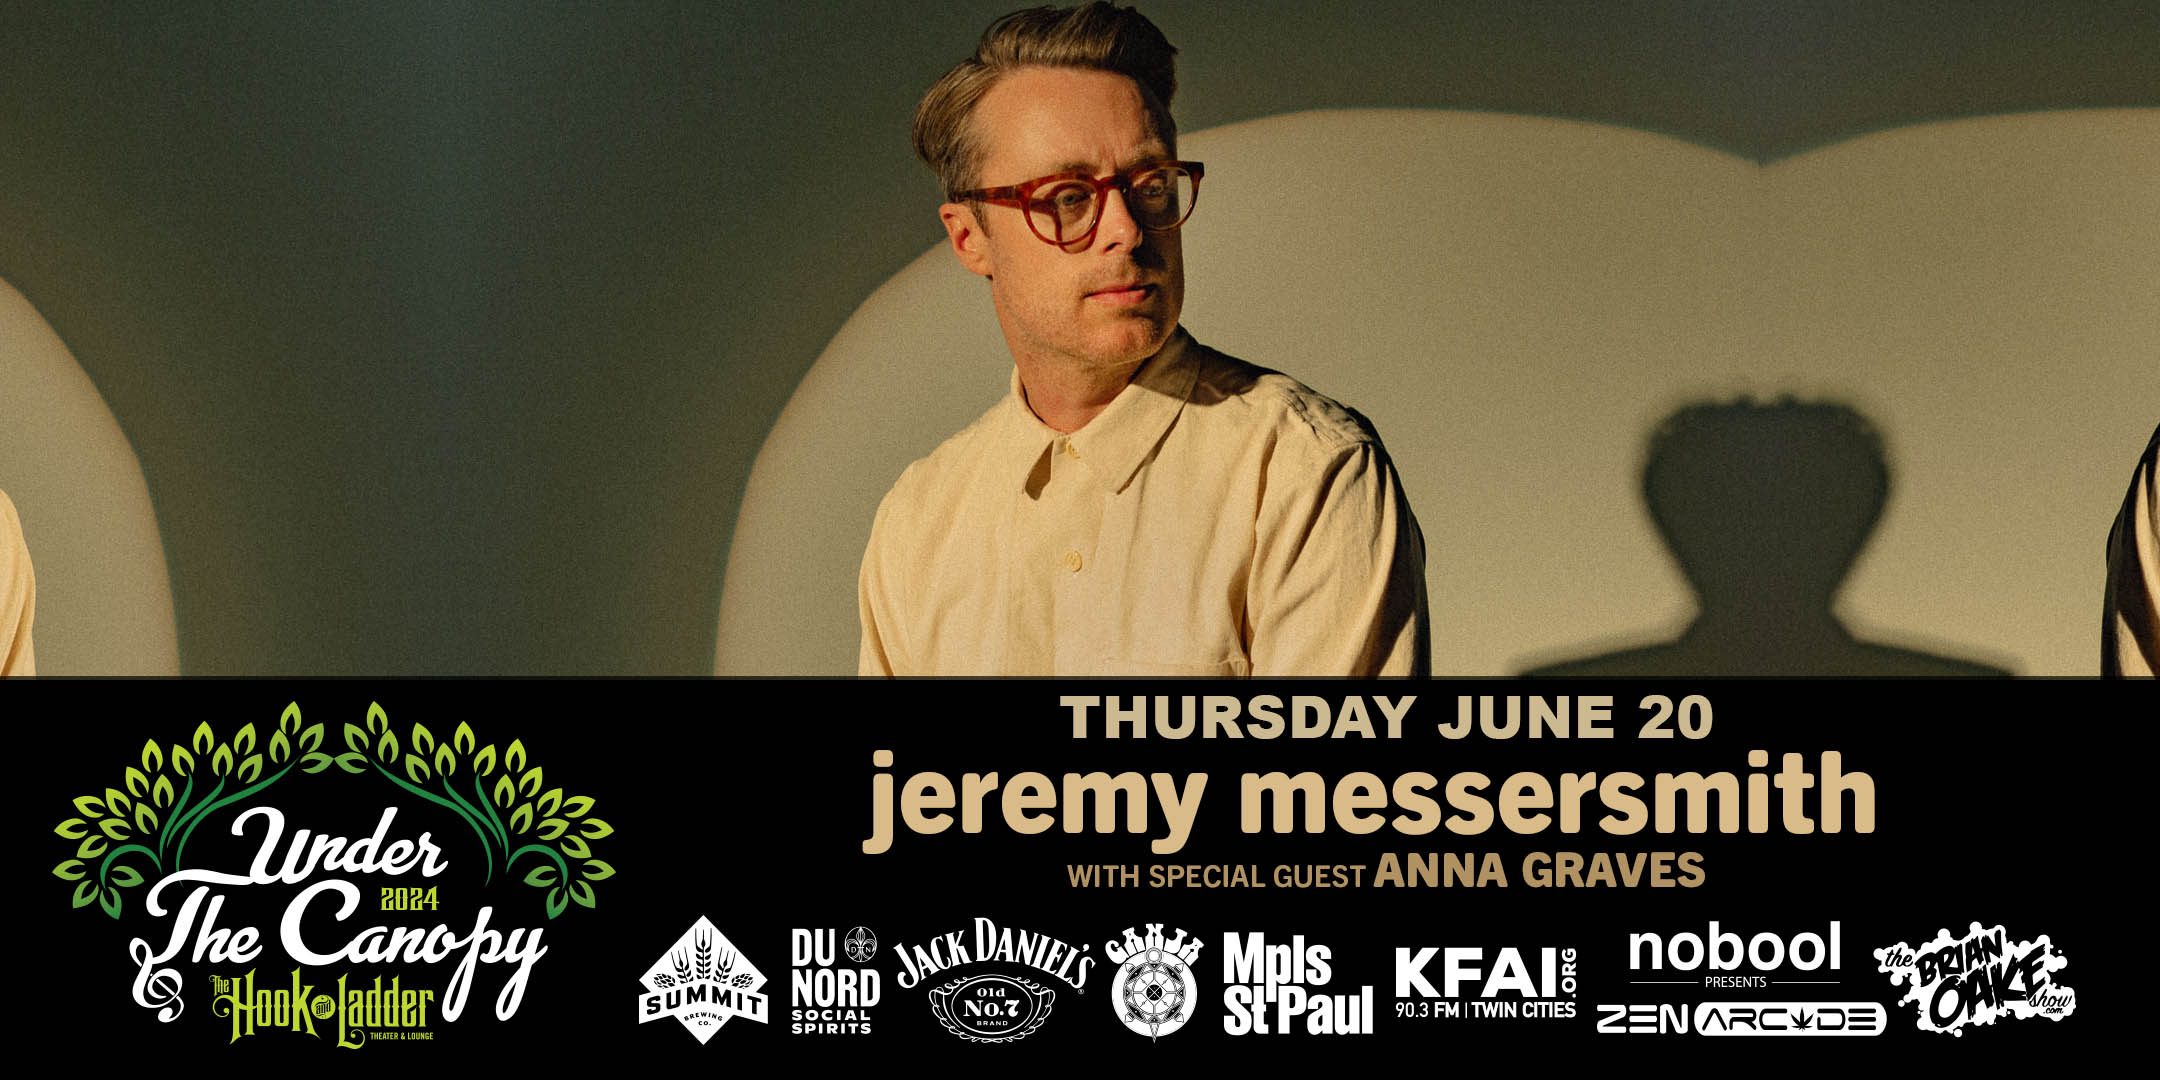 jeremy messersmith with guest Anna Graves Thursday, June 20 Under The Canopy at The Hook and Ladder Theater "An Urban Outdoor Summer Concert Series" Doors 6:00pm :: Music 7:00pm :: 21+ Reserved Seats: $36 GA: $24 ADV / $30 DOS